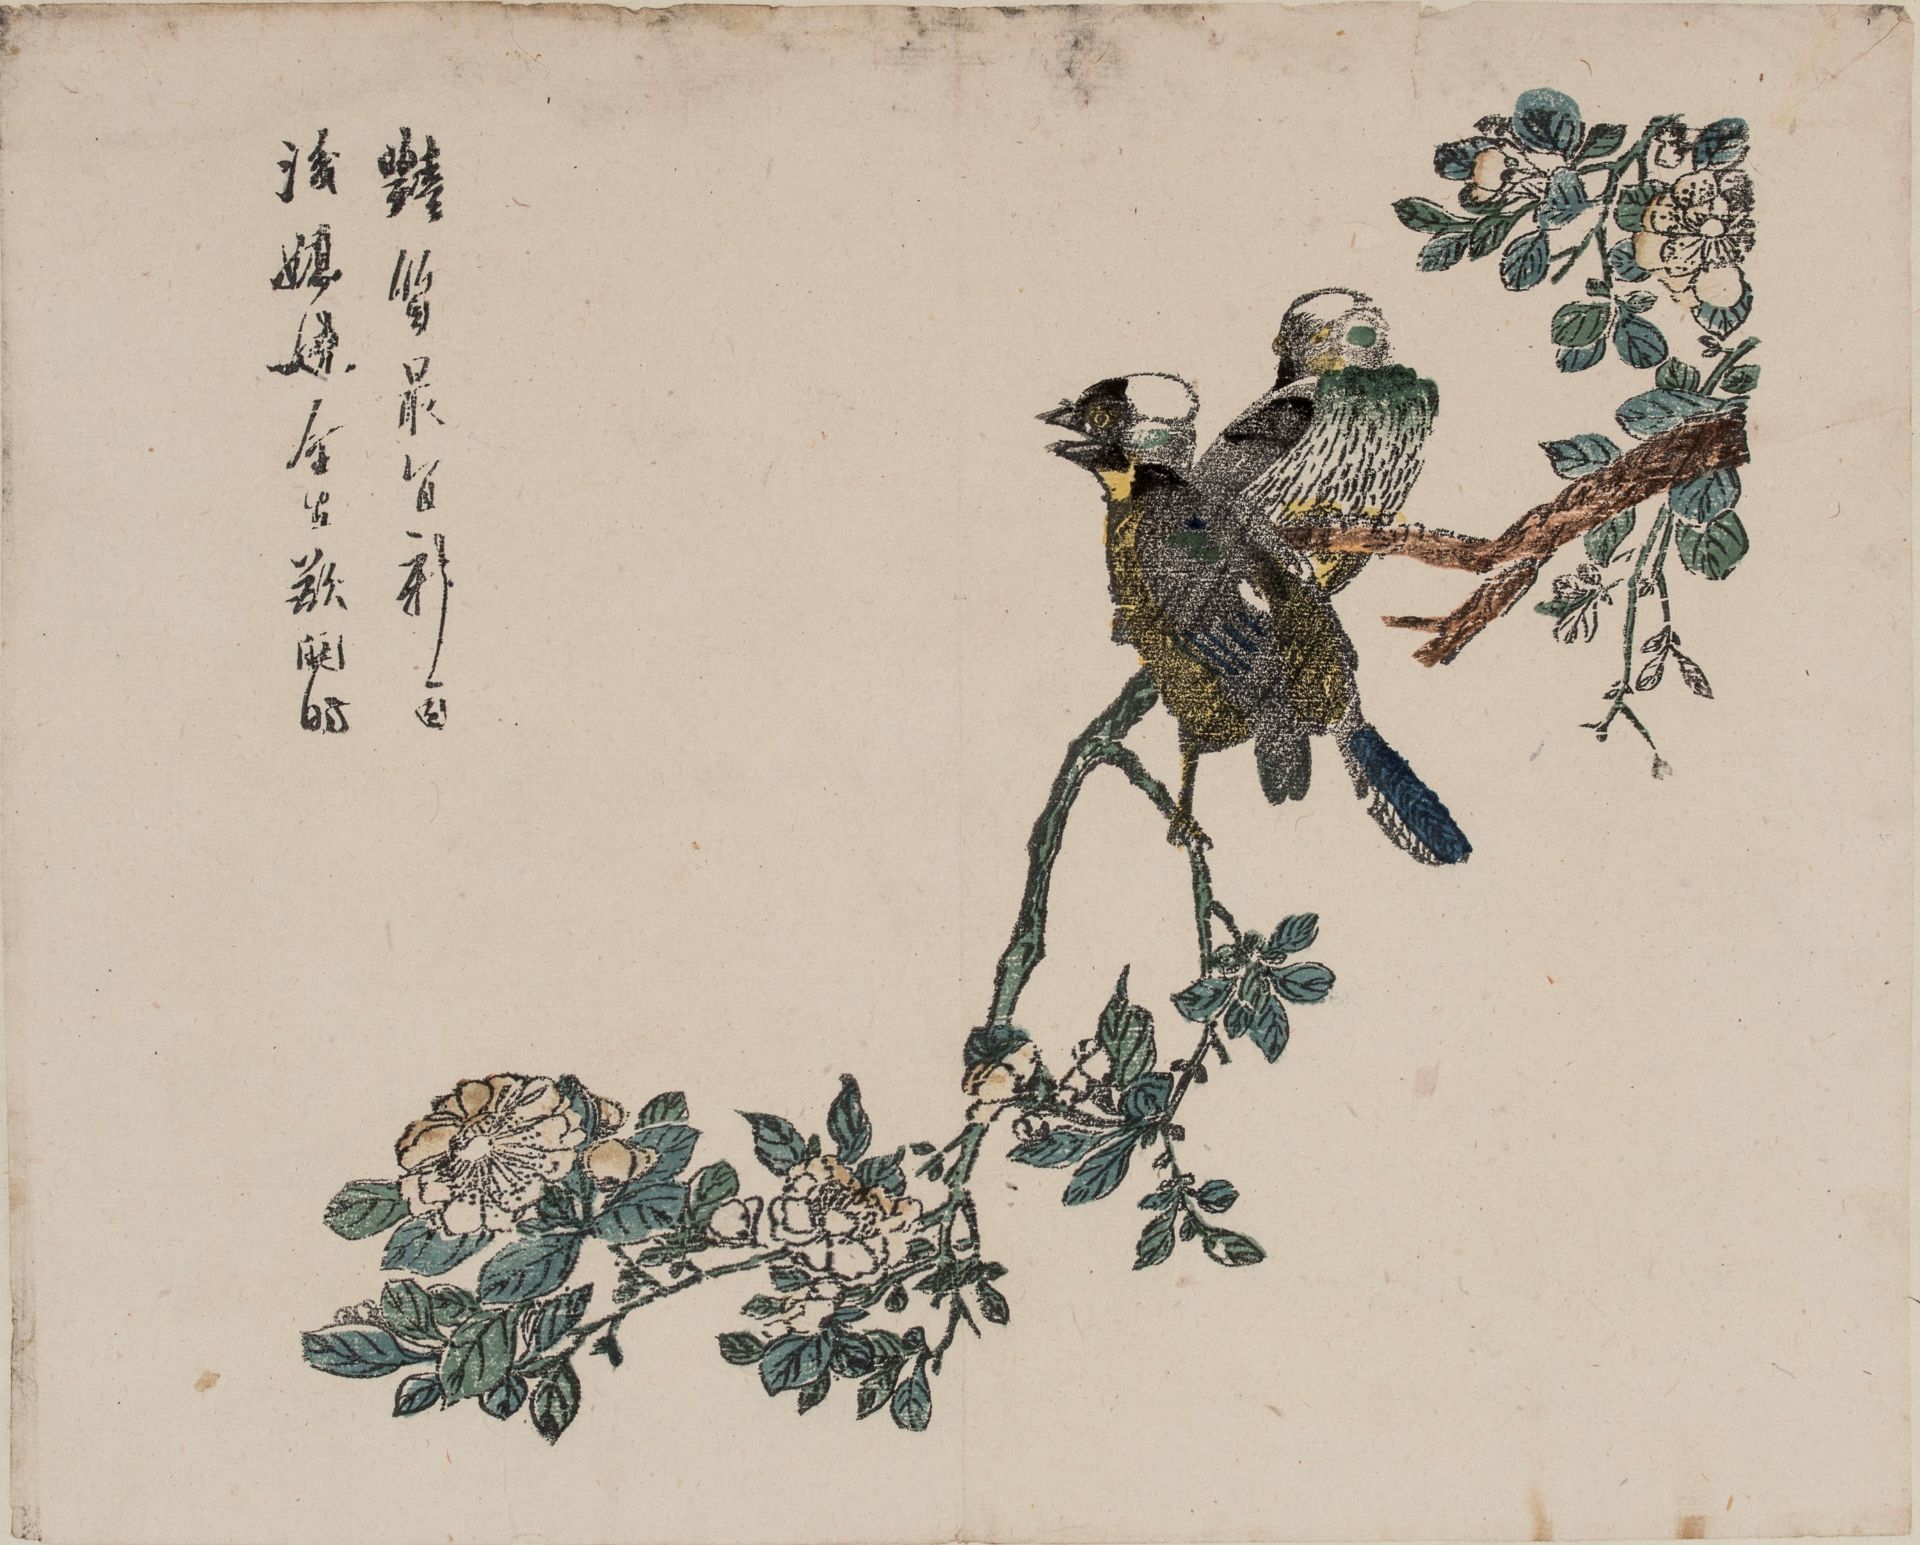 SIX CHINESE COLOR WOODBLOCK PRINTS, 18th CENTURY - Image 4 of 7